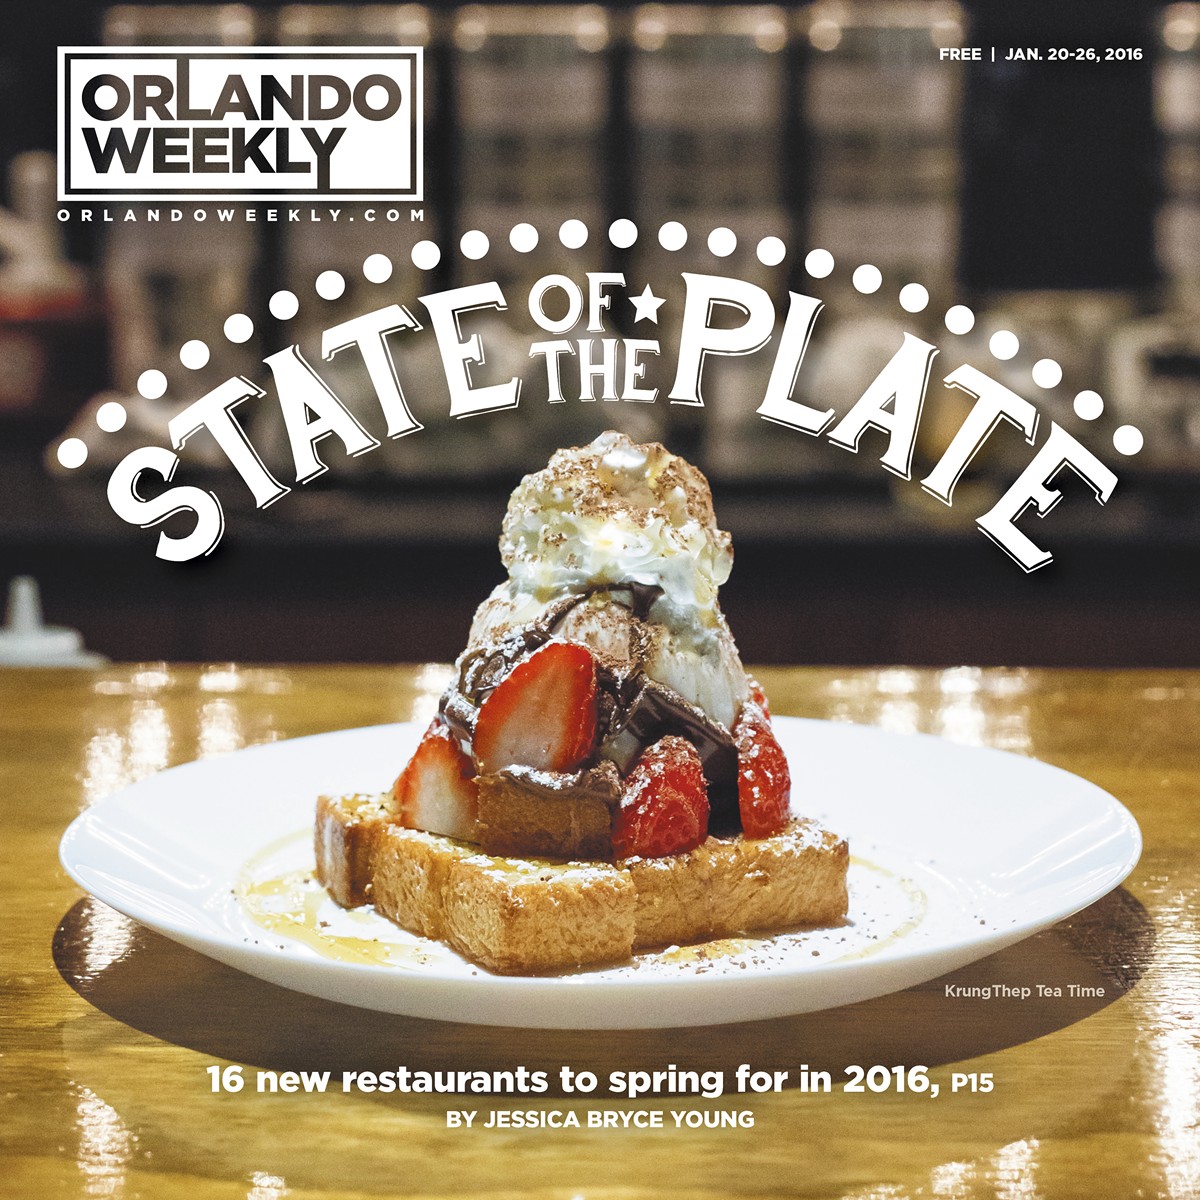 16 new Orlando restaurants you need to try in 2016 | Food & Drink